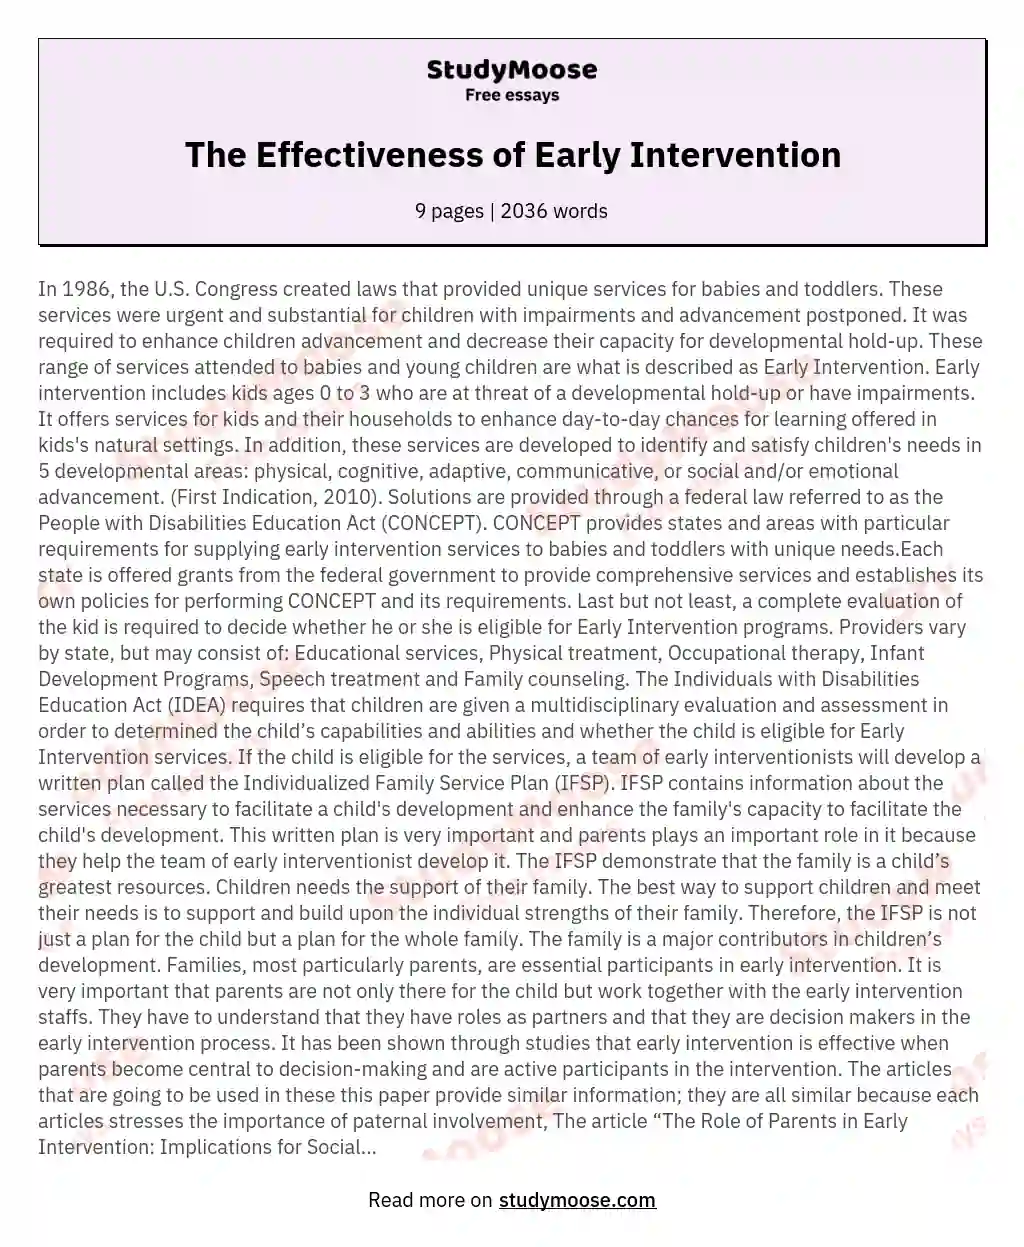 The Effectiveness of Early Intervention